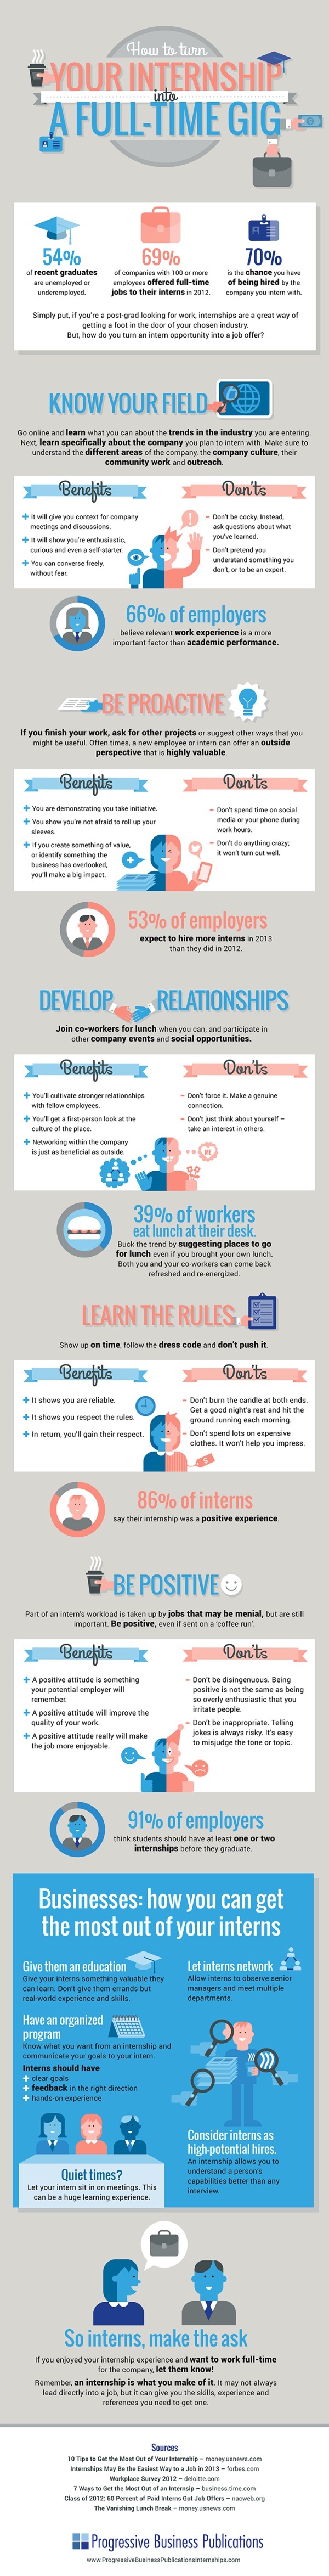 Turn Your Internship Into A Full-Time Job Infographic